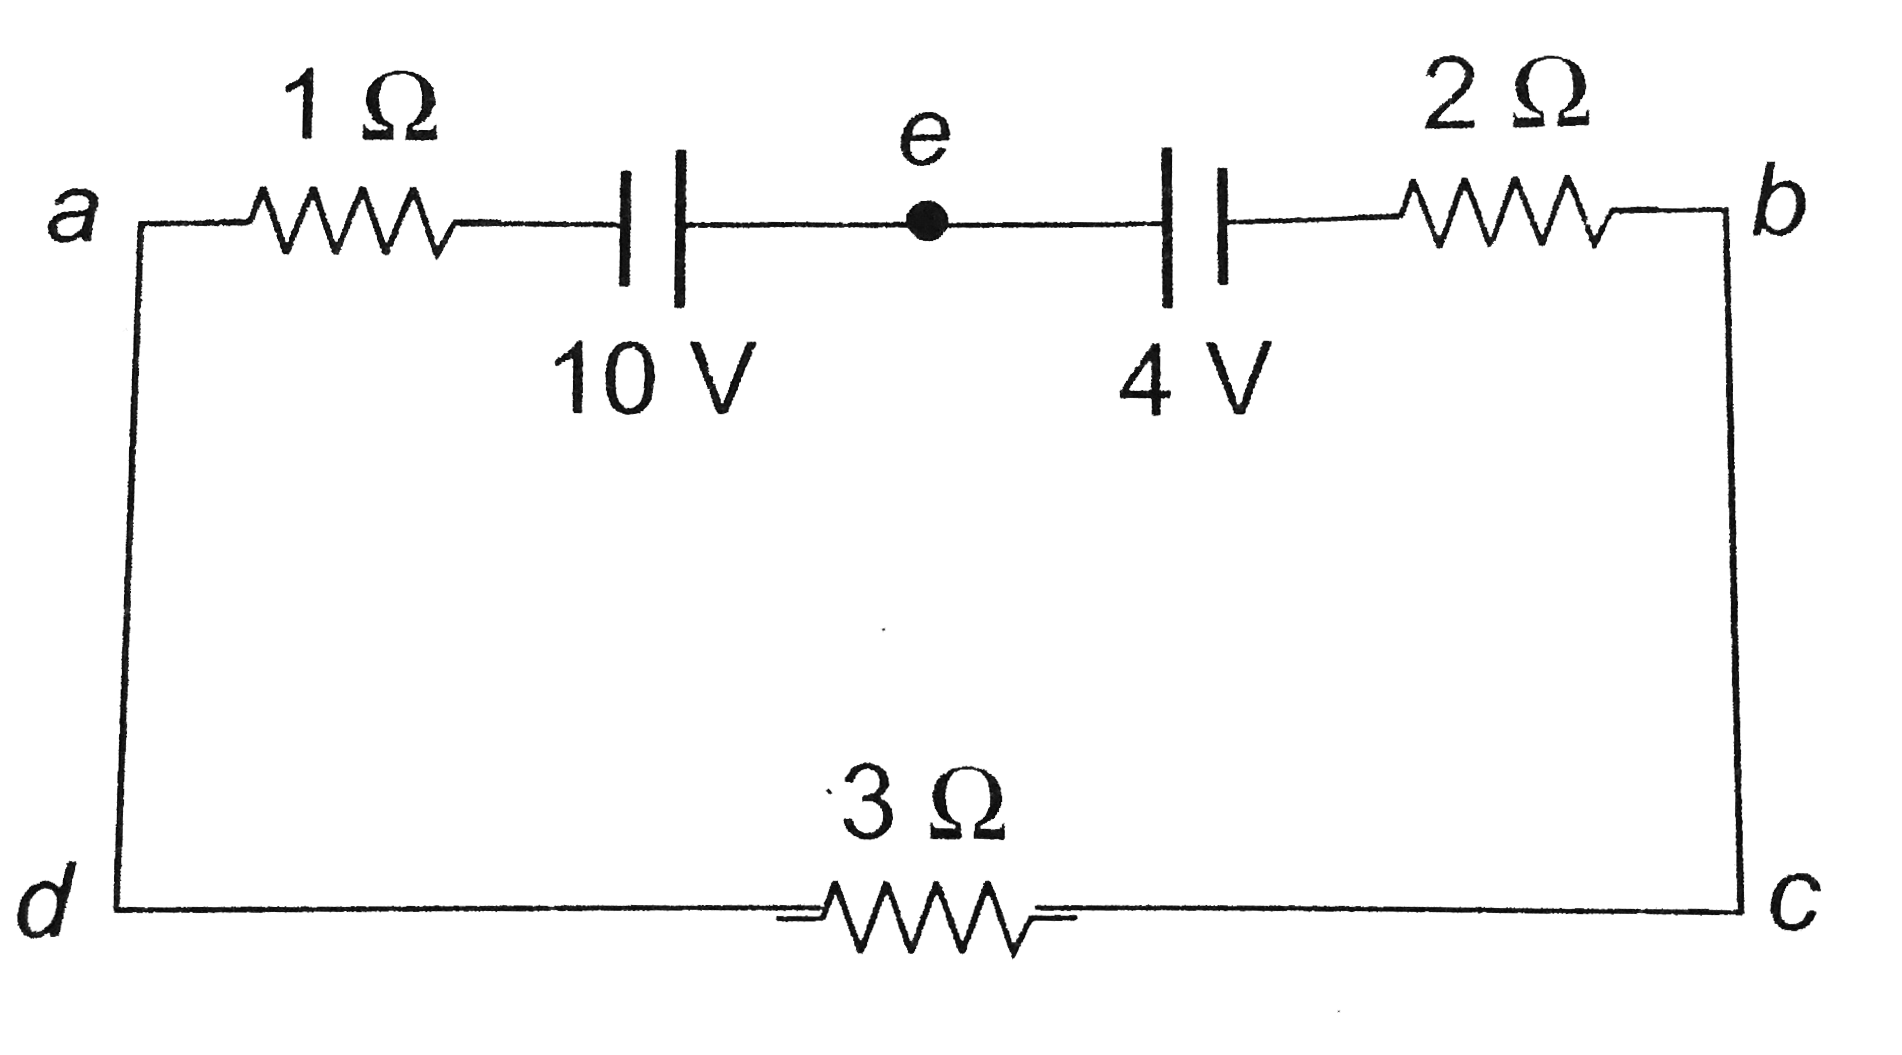 The magnitude and direction of the current in the circuit shown will be